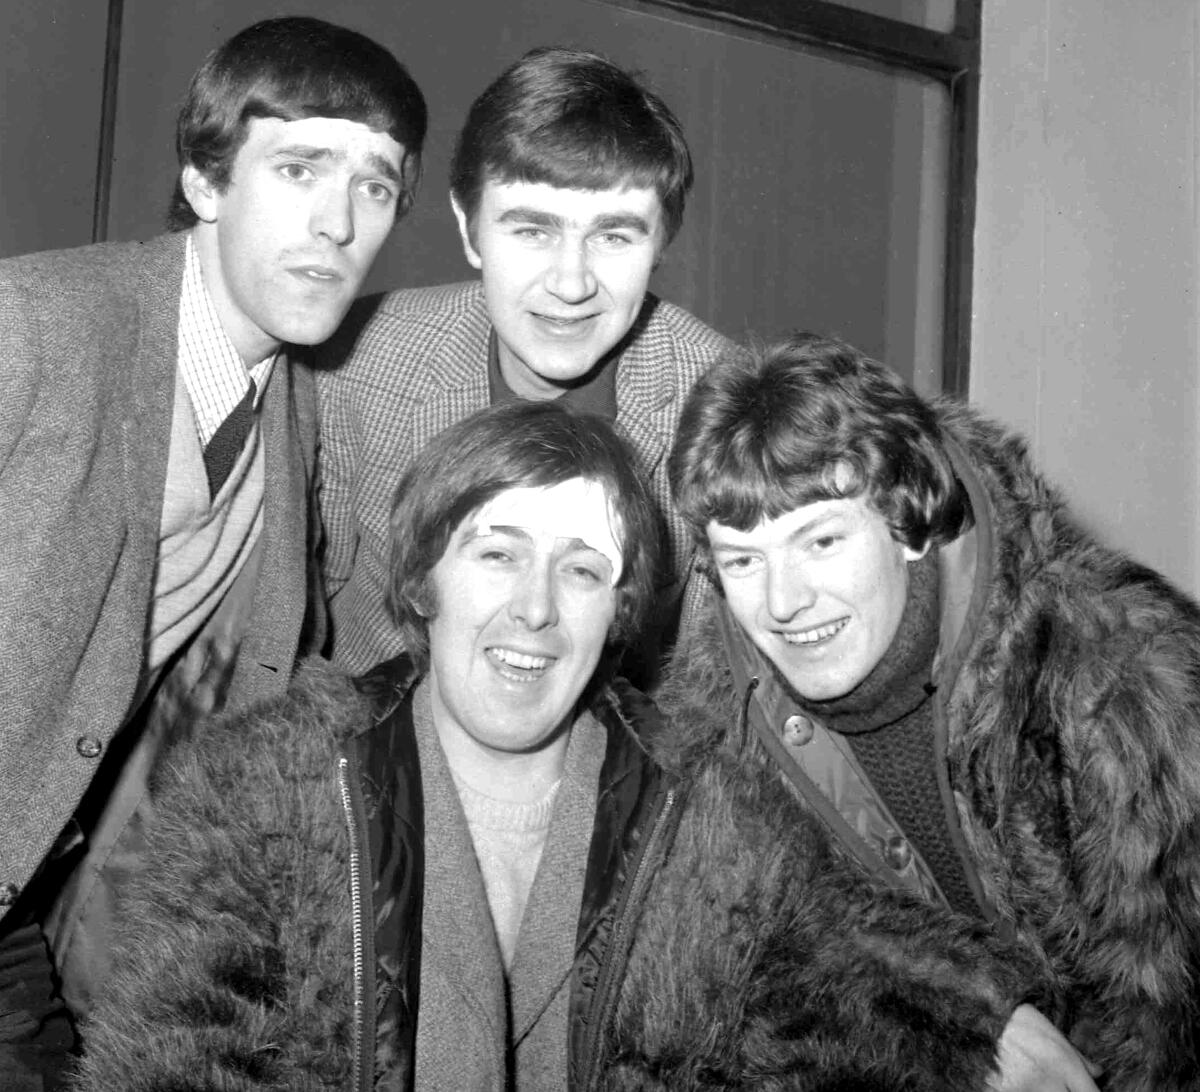 Spencer Davis Group members smile for a photo in 1966.